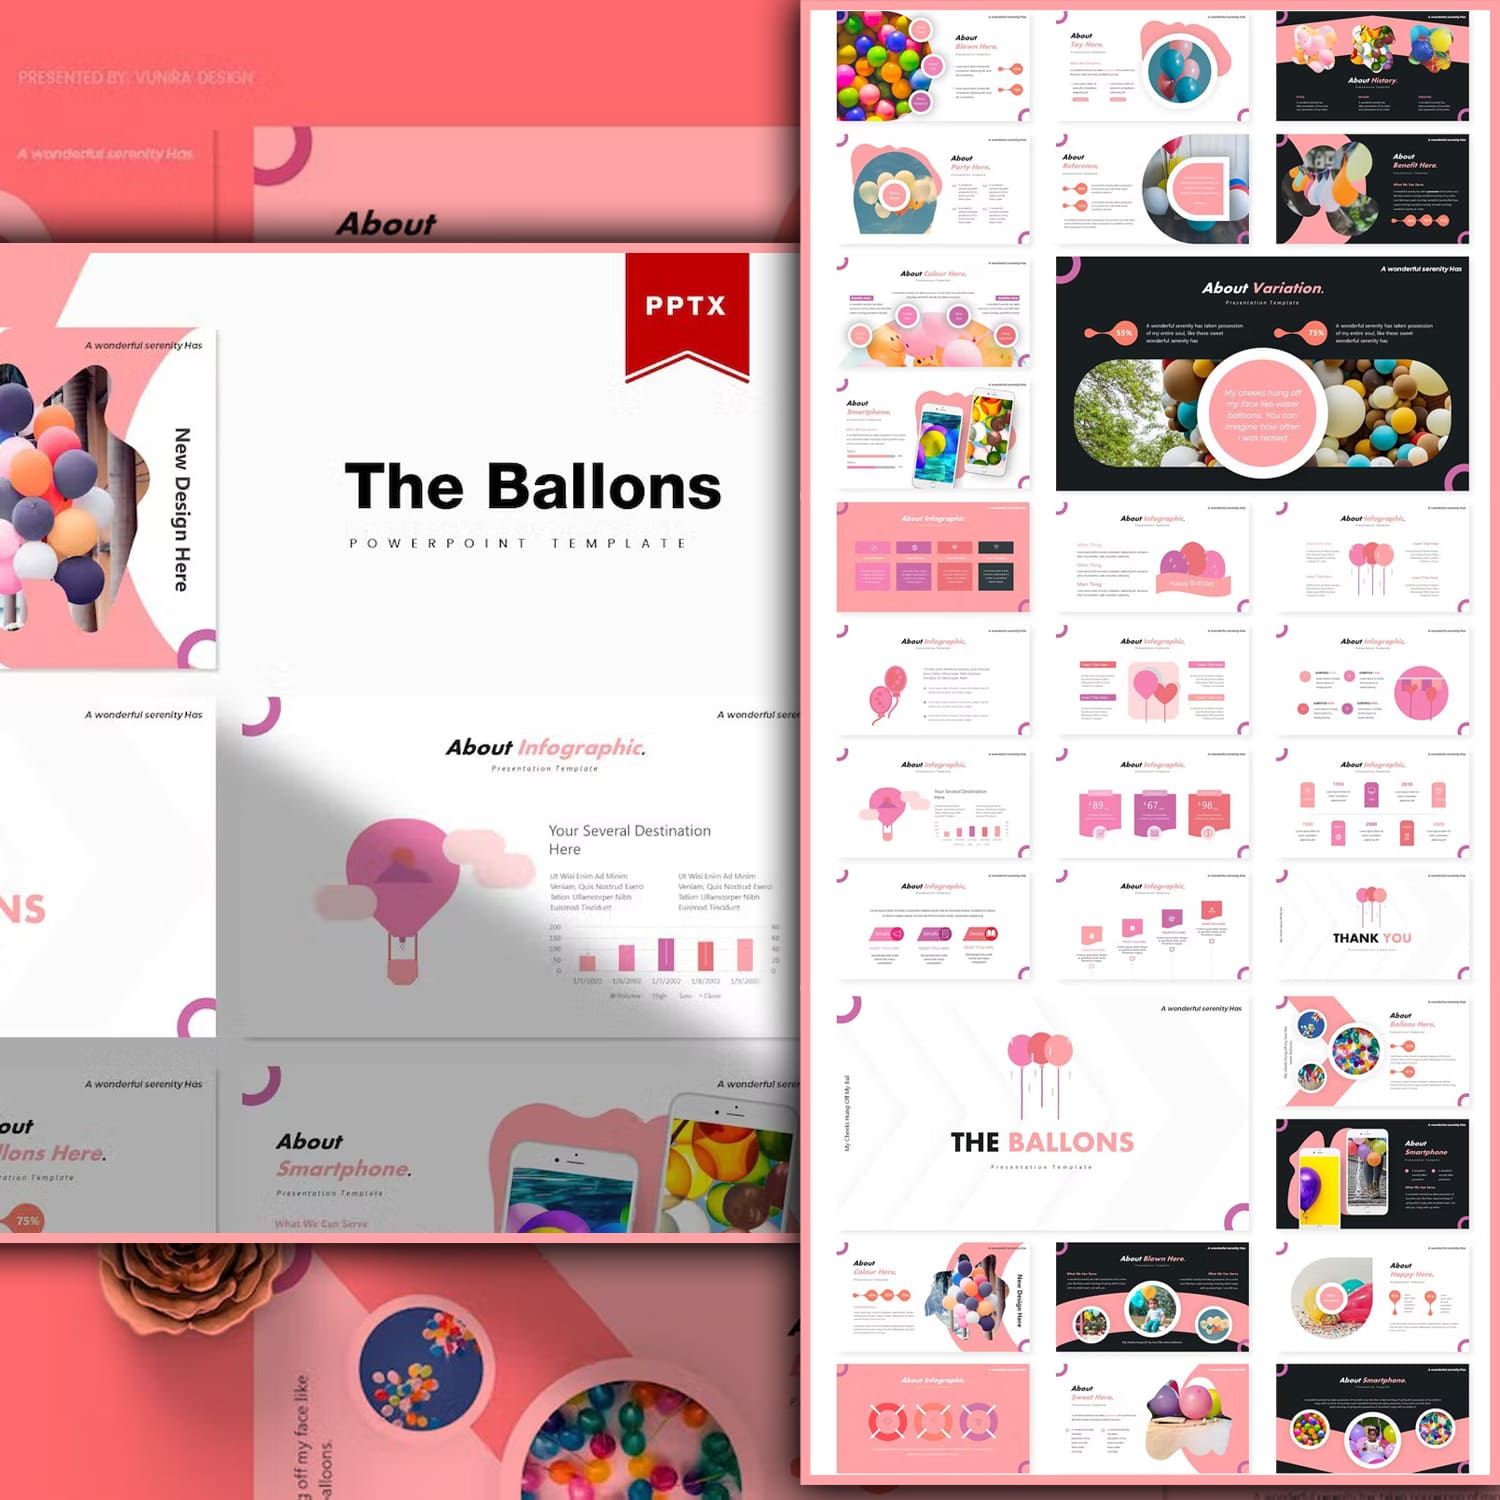 The Balloons | Powerpoint Template Cover.